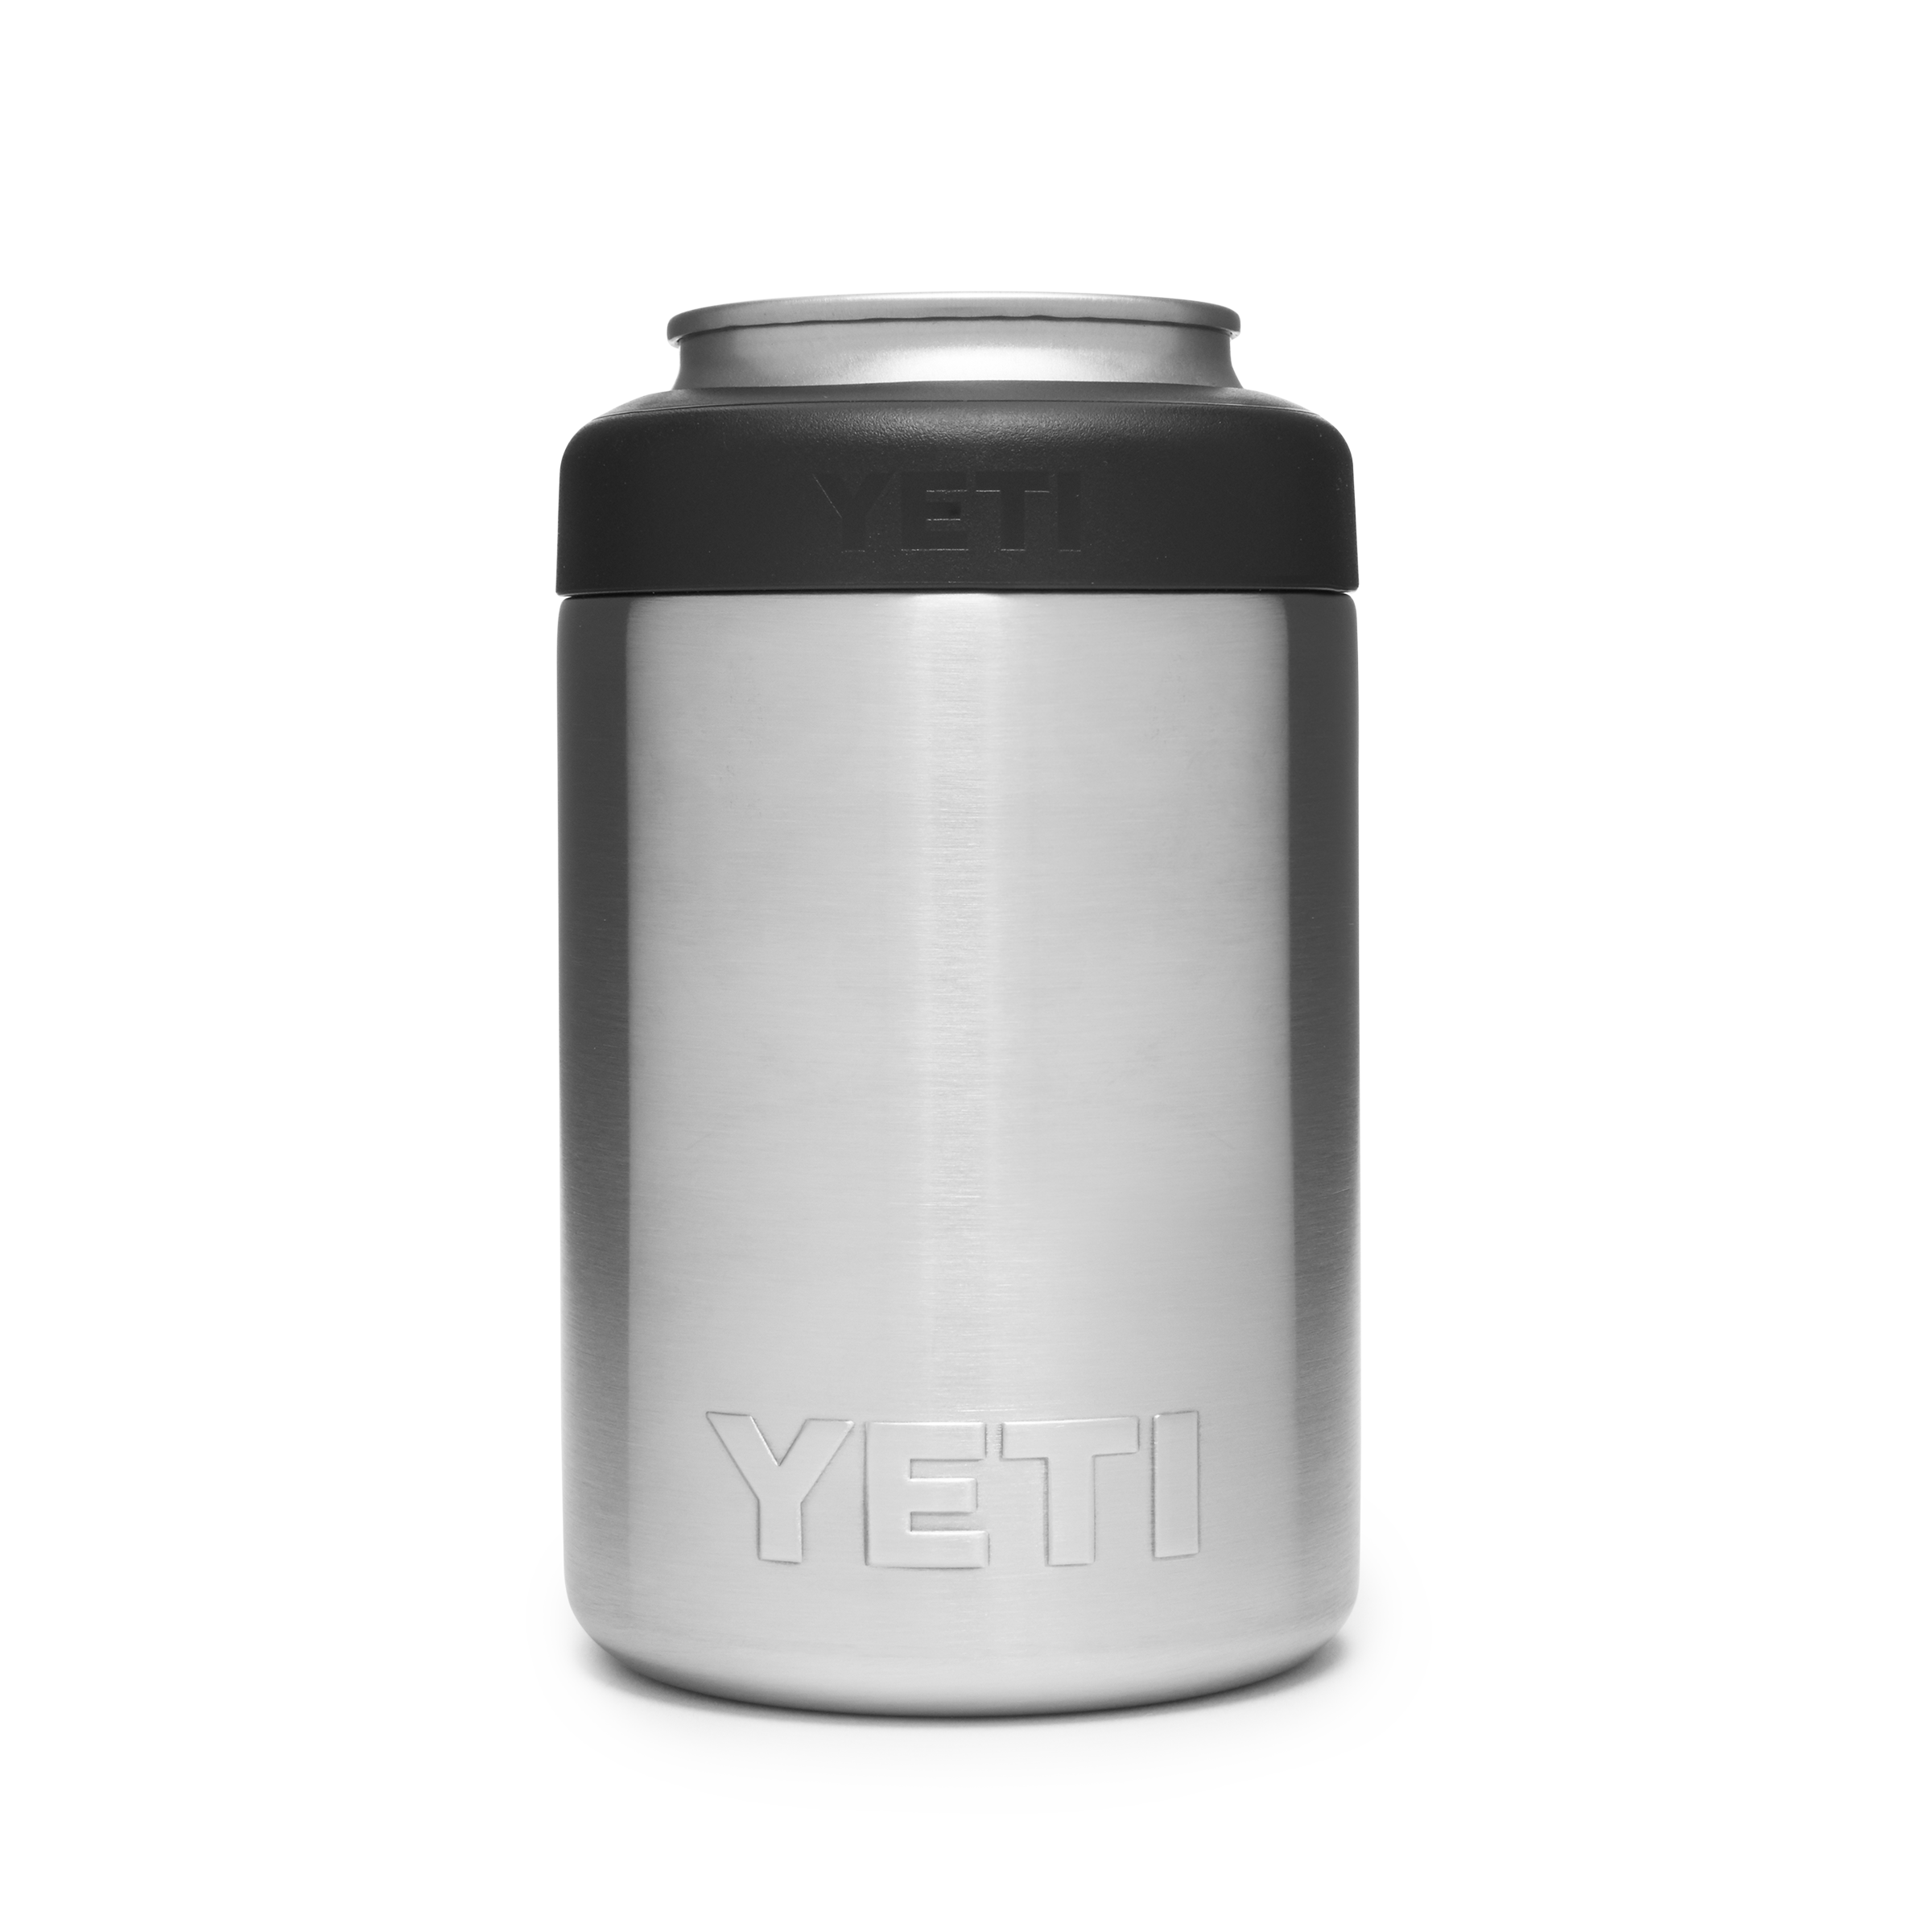 https://team-vincent-motorsports.myshopify.com/cdn/shop/products/191418-New-Colster-Family-Launch-1H-2020-Dealer-Images-YETI-20191010-Product-Colster-Front-Stainless-2400x400.png?v=1701921951